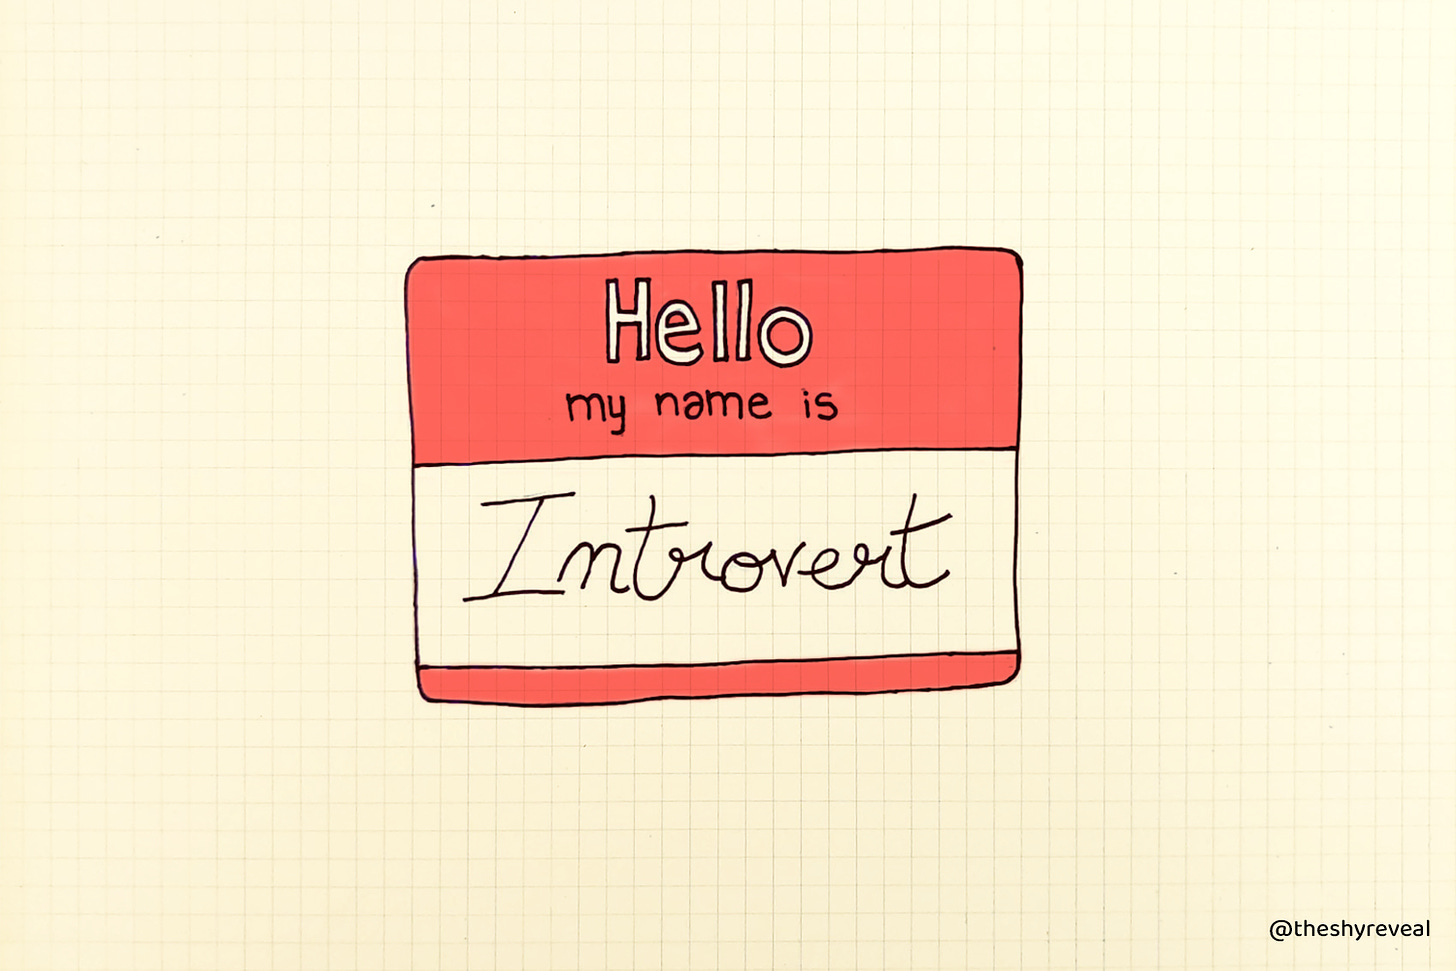 Drawing of a red sticker that says: "Hello, my name is: Introvert"